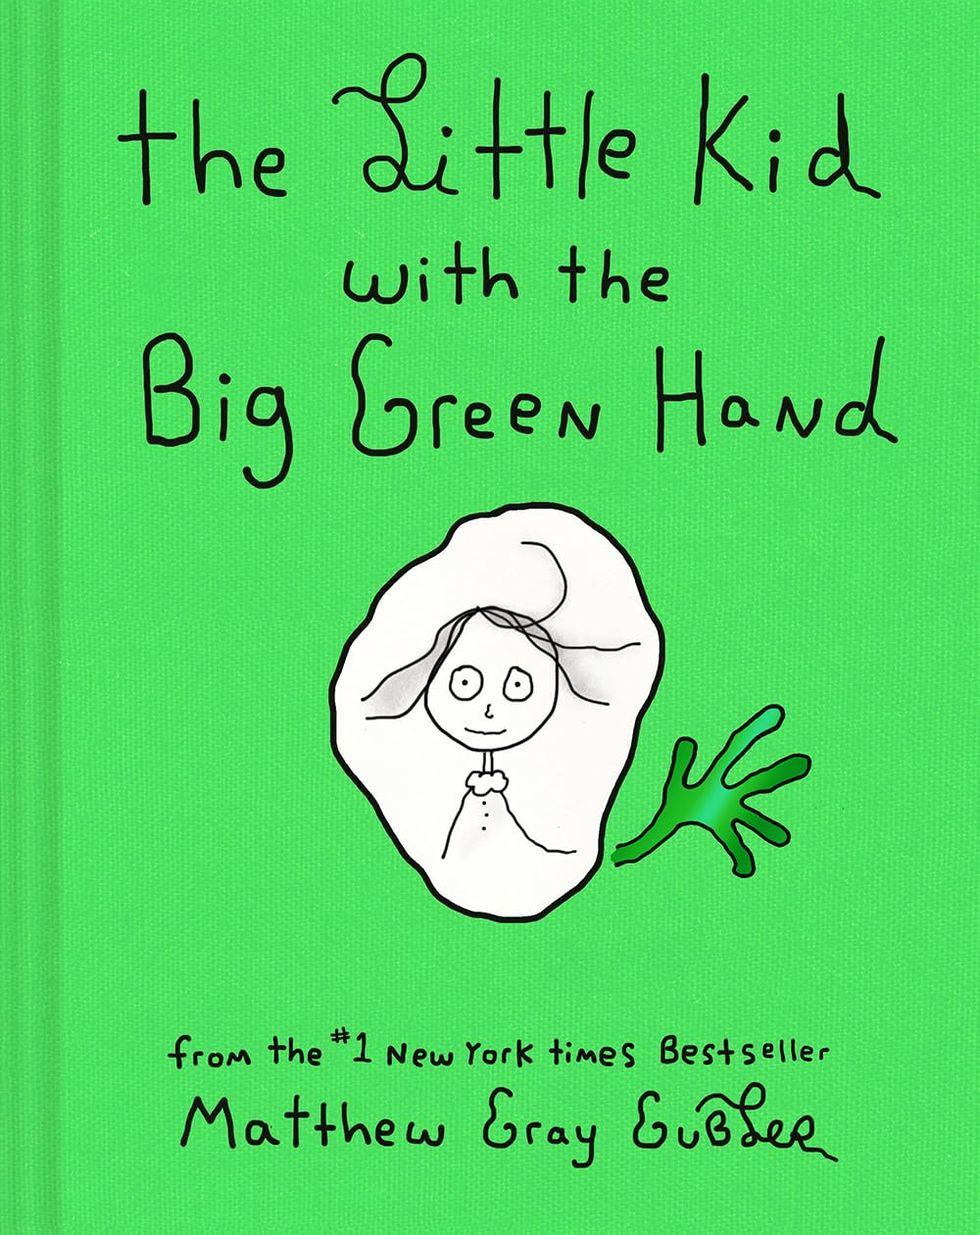 'The Little Kid With the Big Green Hand'